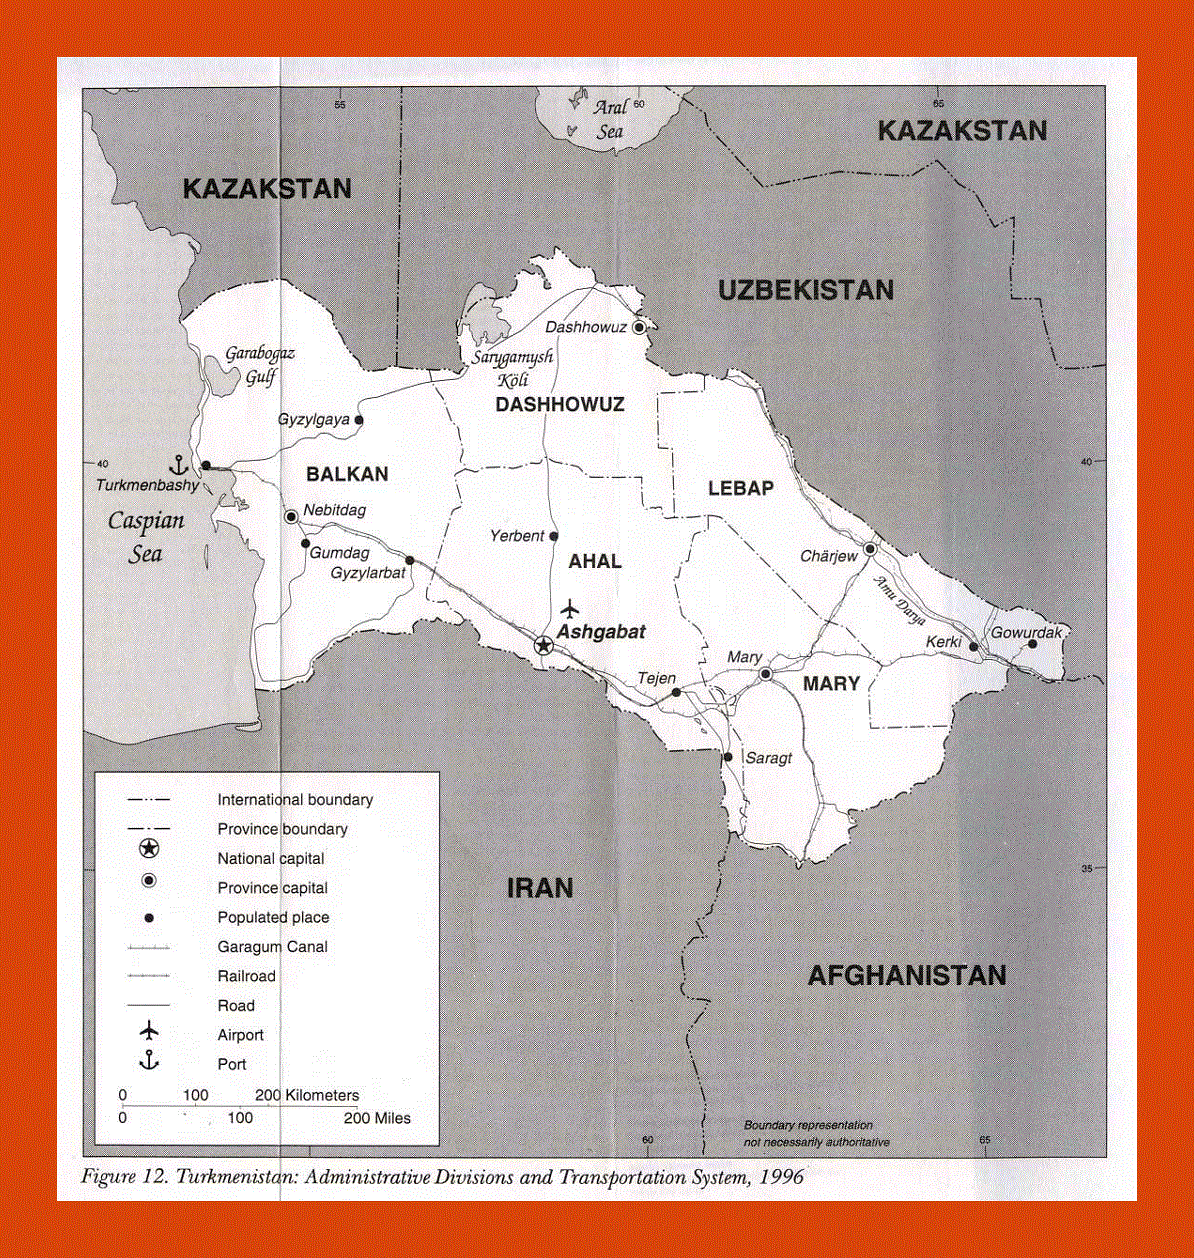 Administrative divisions and transportation system map of Turkmenistan - 1996